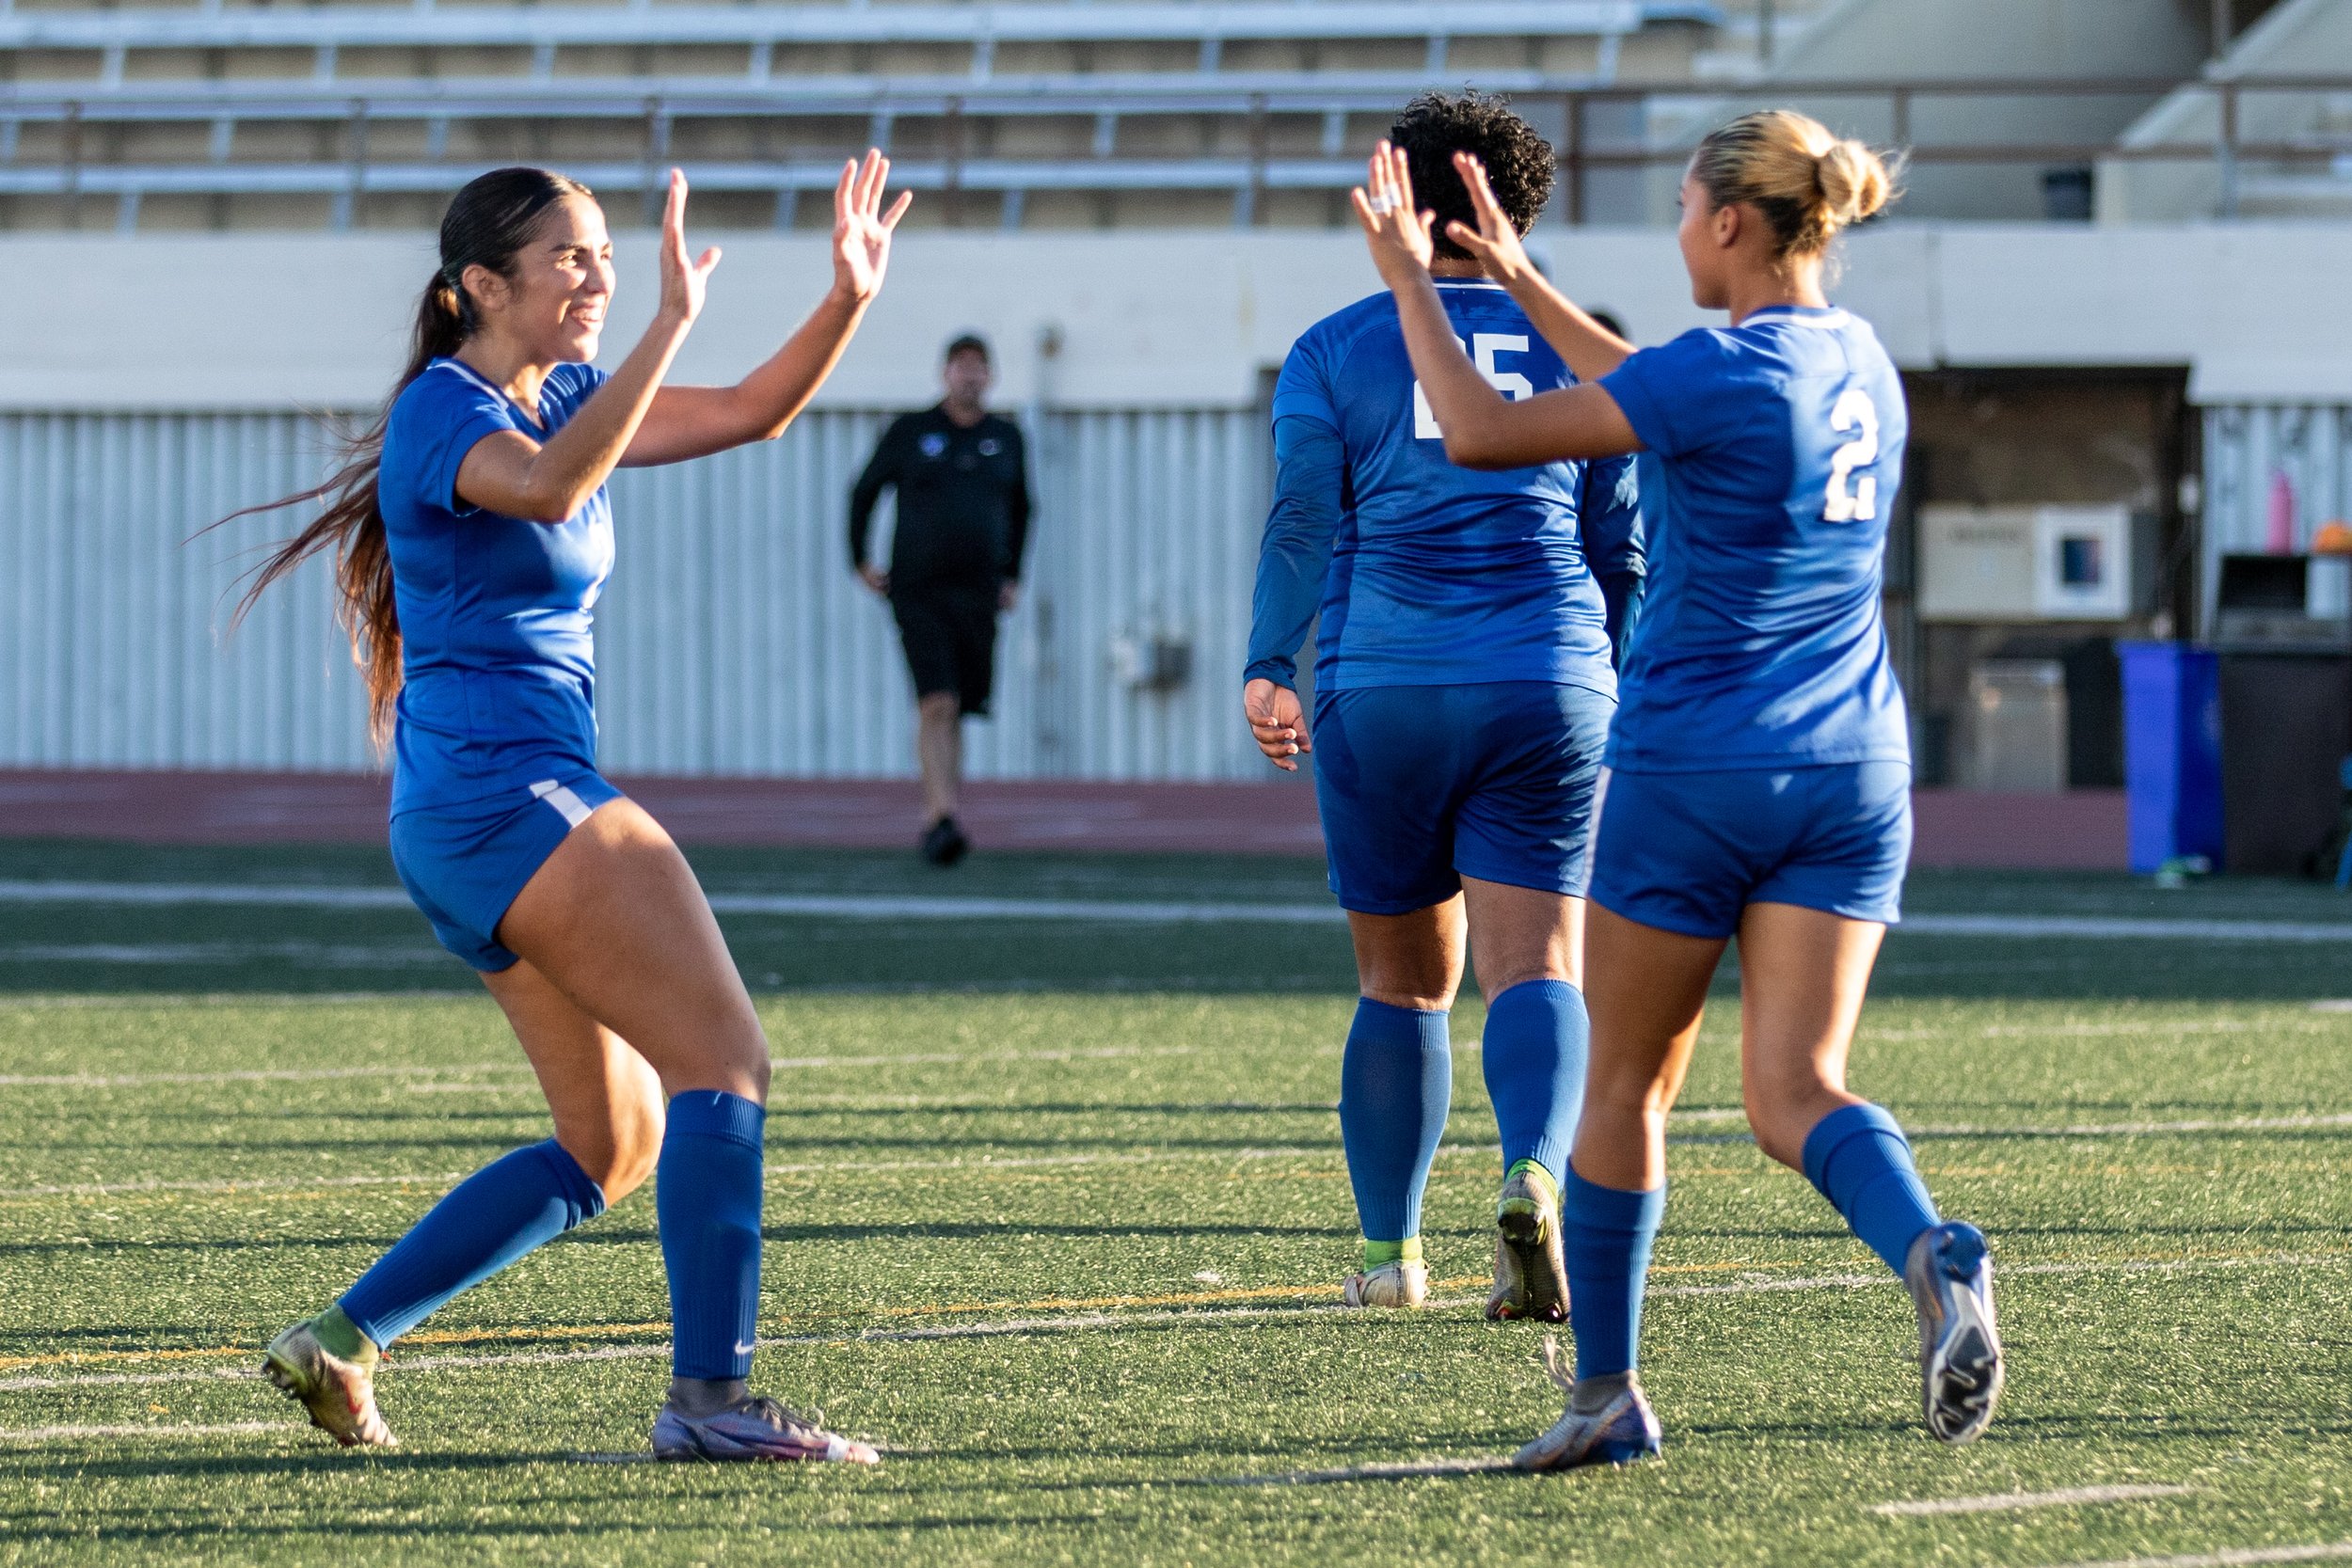  Santa Monica College Corsairs' Jessica Narez (left) congratulates Alanis Rofriguez (right) after scoring a goal during the women's soccer match on Friday, Oct. 6, 2023 at Corsair Field in Santa Monica, Calif. The Corsairs won, 4-1. (Akemi Rico | The